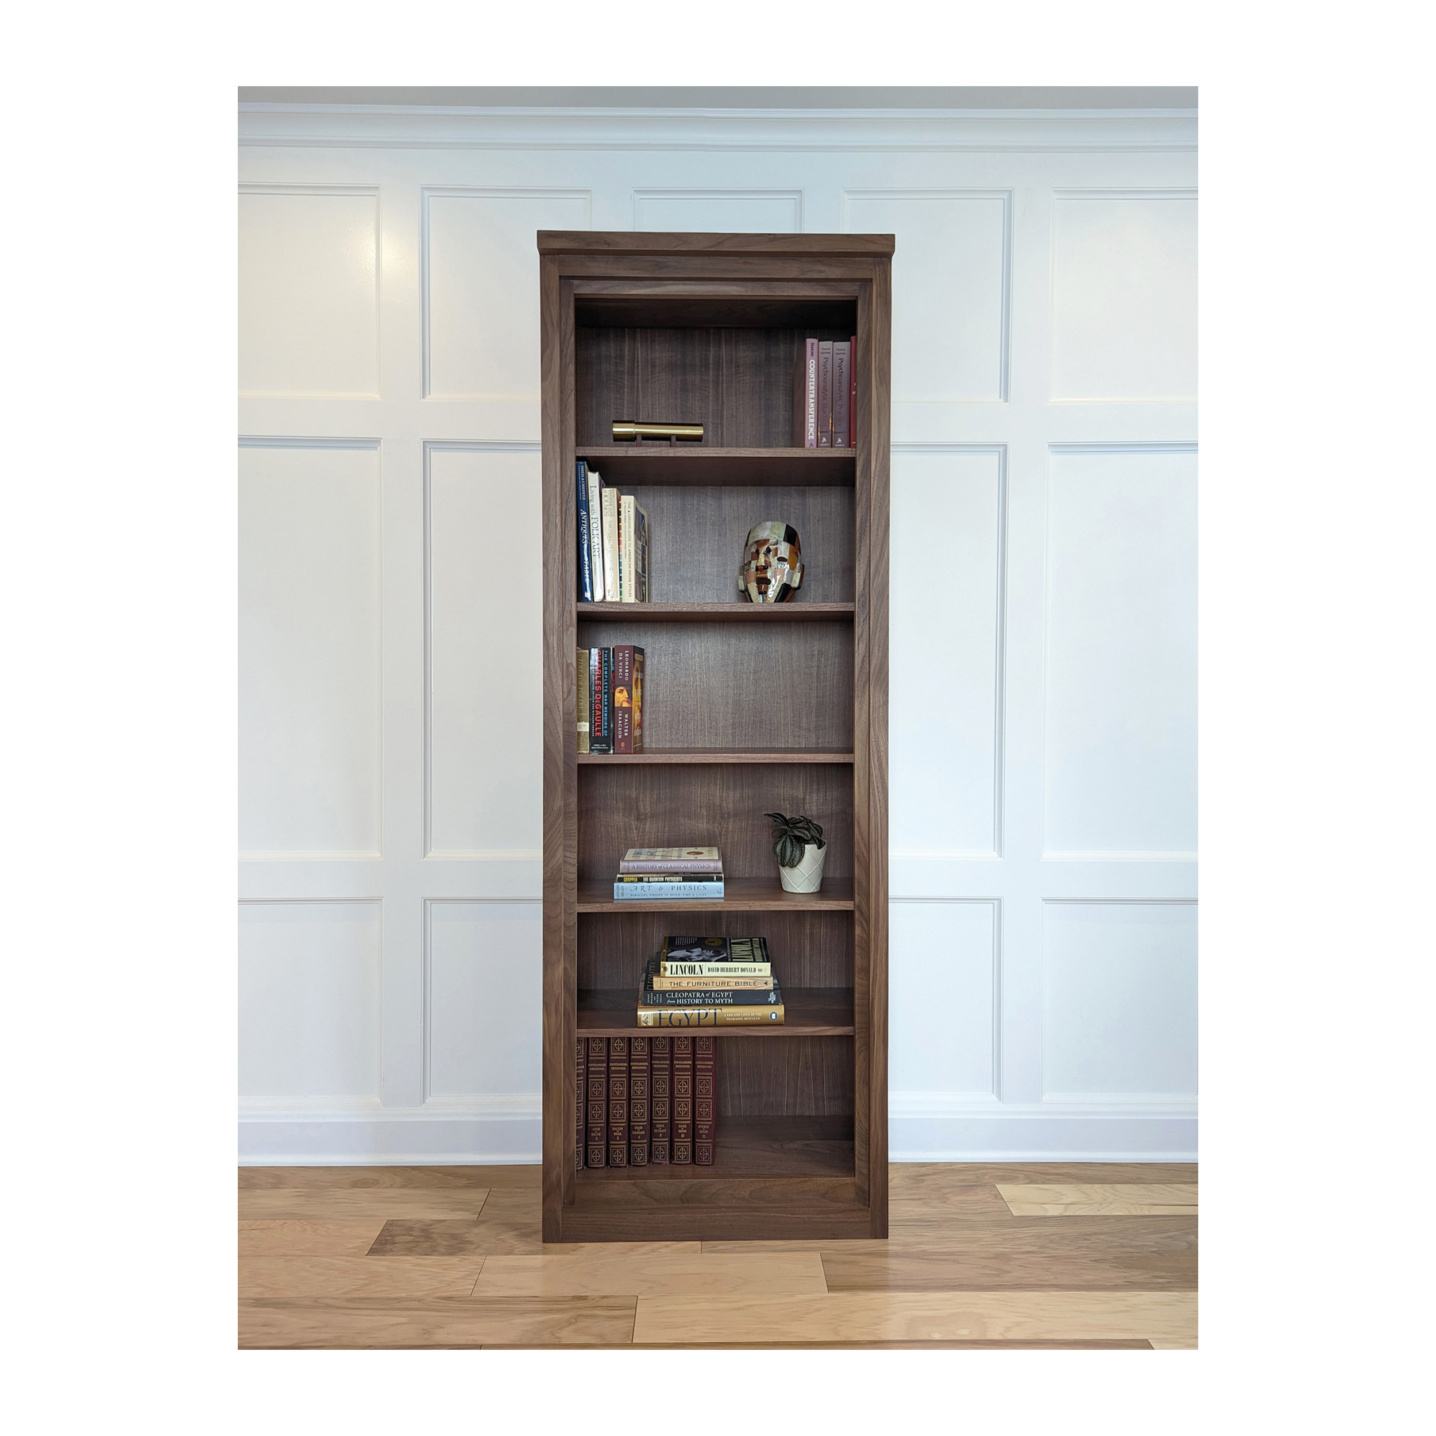 Solid wood bookshelf built in Ohio with adjustable shelves--Made by 57NorthPlank Tailored Fine Furniture